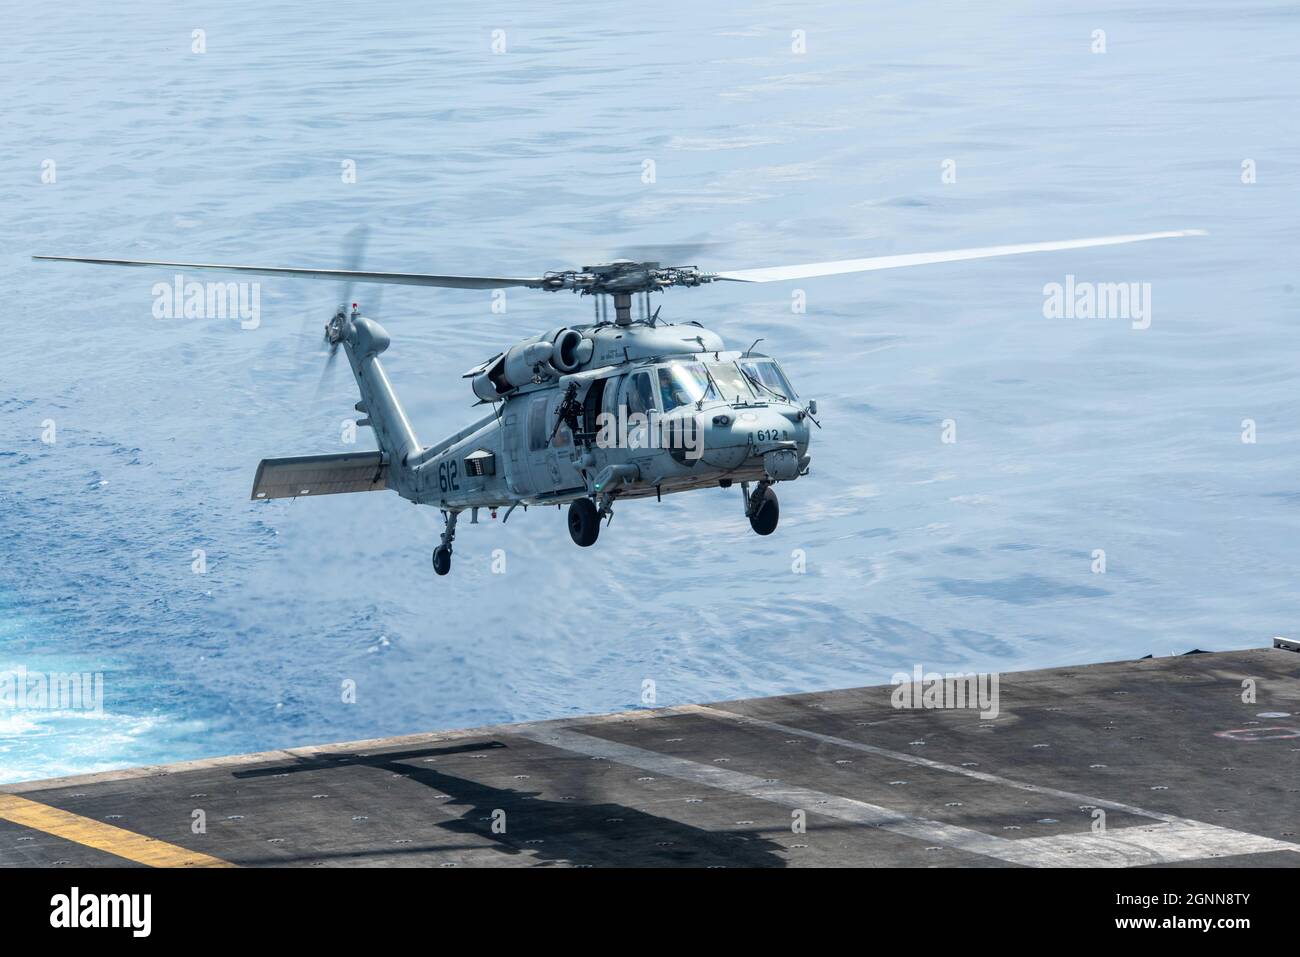 210925-N-CW176-1031 SOUTH CHINA SEA (Sept. 25, 2021) – An MH-60S Sea Hawk, attached to the Golden Falcons of Helicopter Sea Combat Squadron (HSC) 12, launches from the flight deck of the U.S. Navy’s only forward-deployed aircraft carrier USS Ronald Reagan (CVN 76). Ronald Reagan, the flagship of Carrier Strike Group 5, provides a combat-ready force that protects and defends the United States, and supports alliances, partnerships and collective maritime interests in the Indo-Pacific region. (U.S. Navy photo by Mass Communication Specialist Seaman Matthew Mitchell) Stock Photo